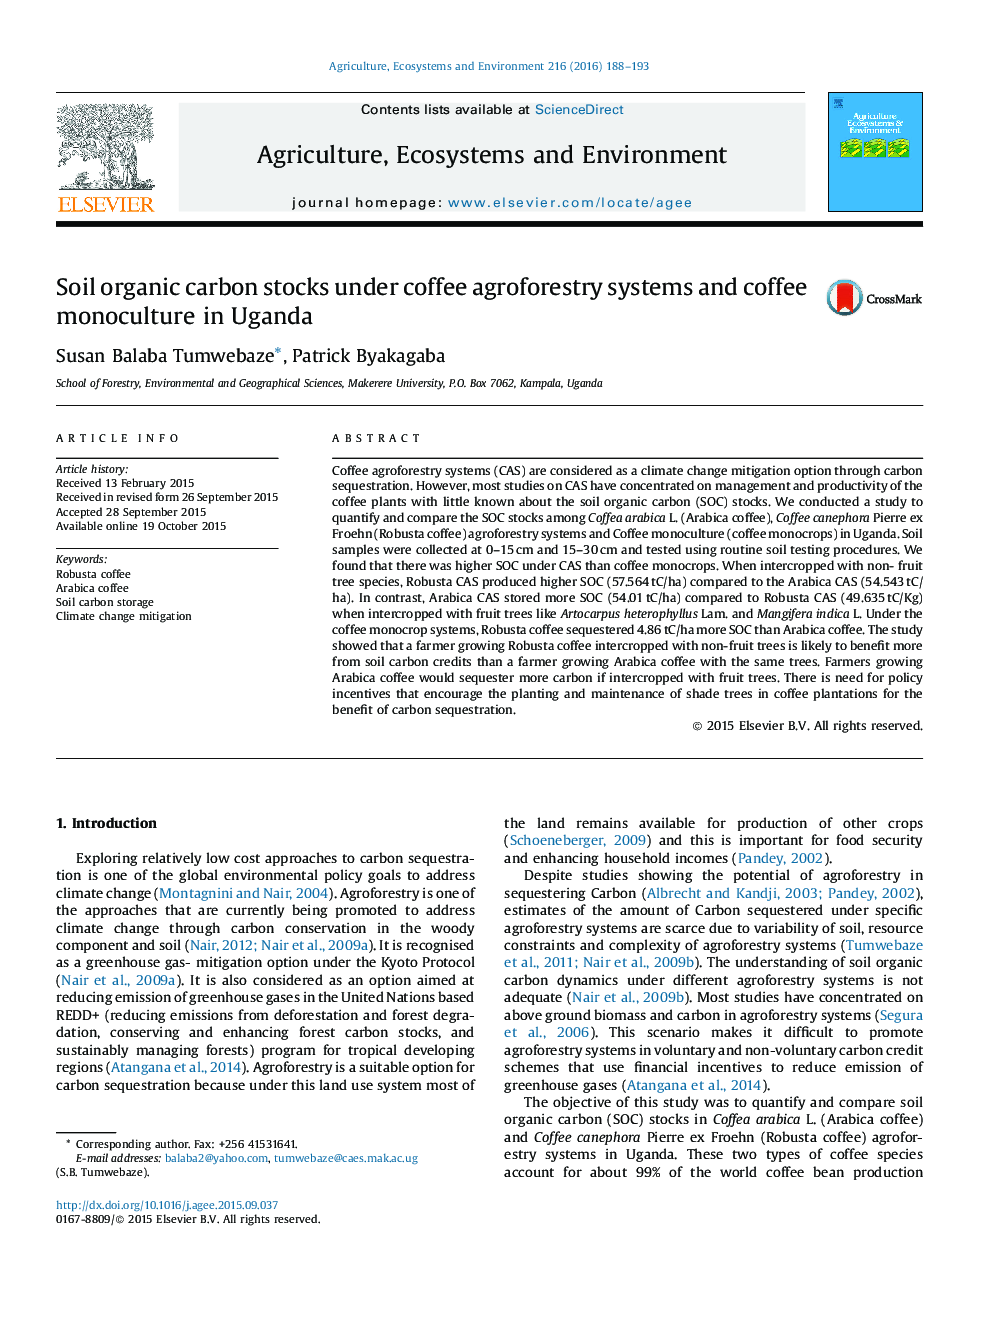 Soil organic carbon stocks under coffee agroforestry systems and coffee monoculture in Uganda